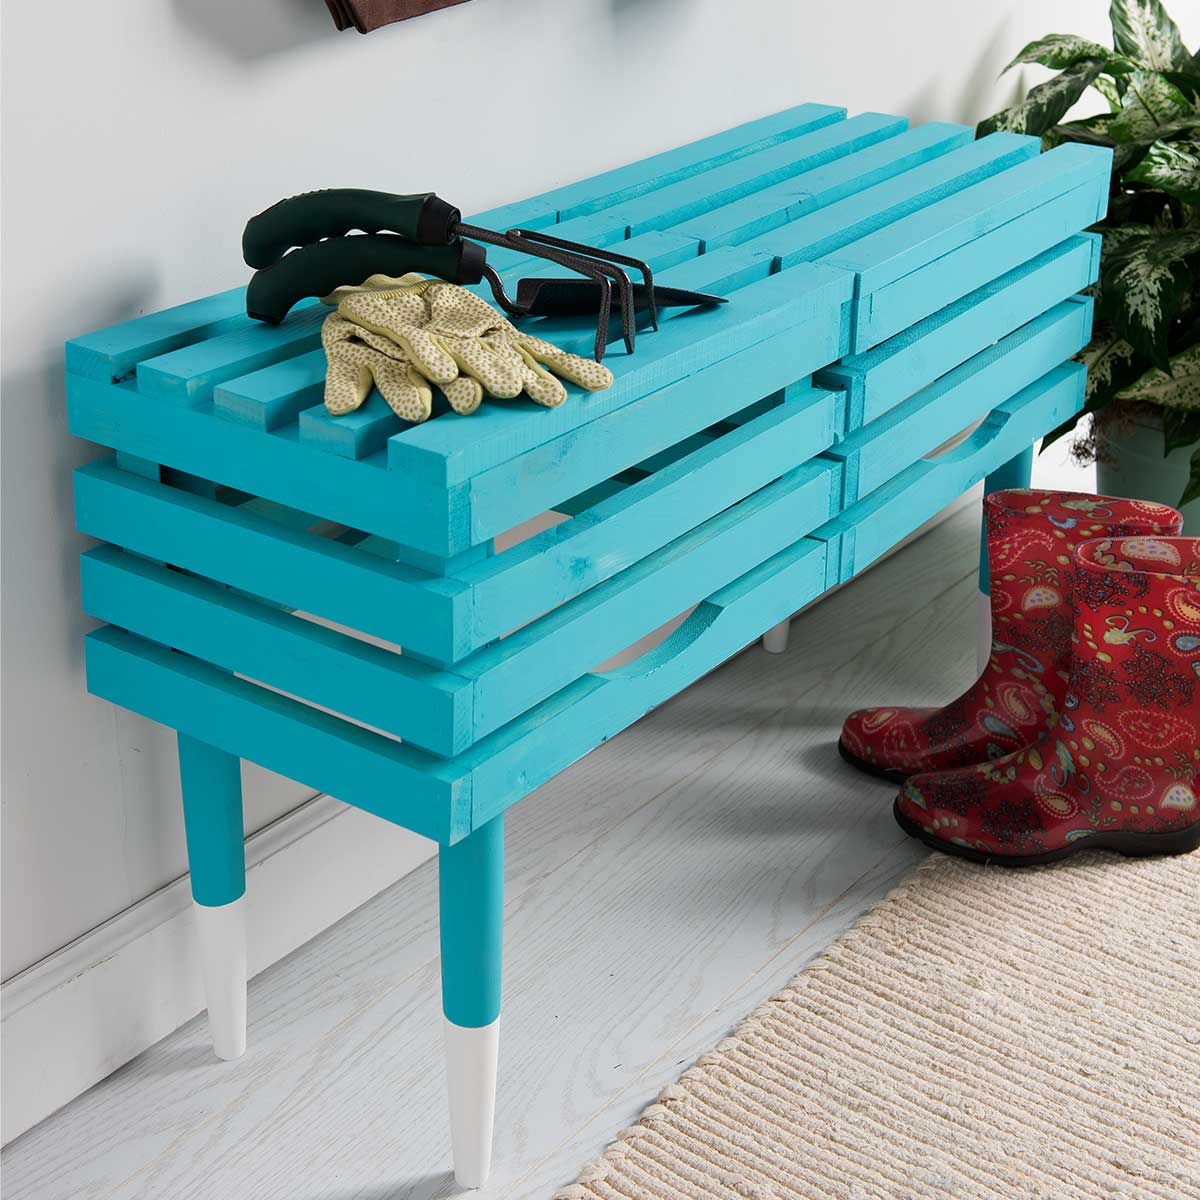 Crate Bench